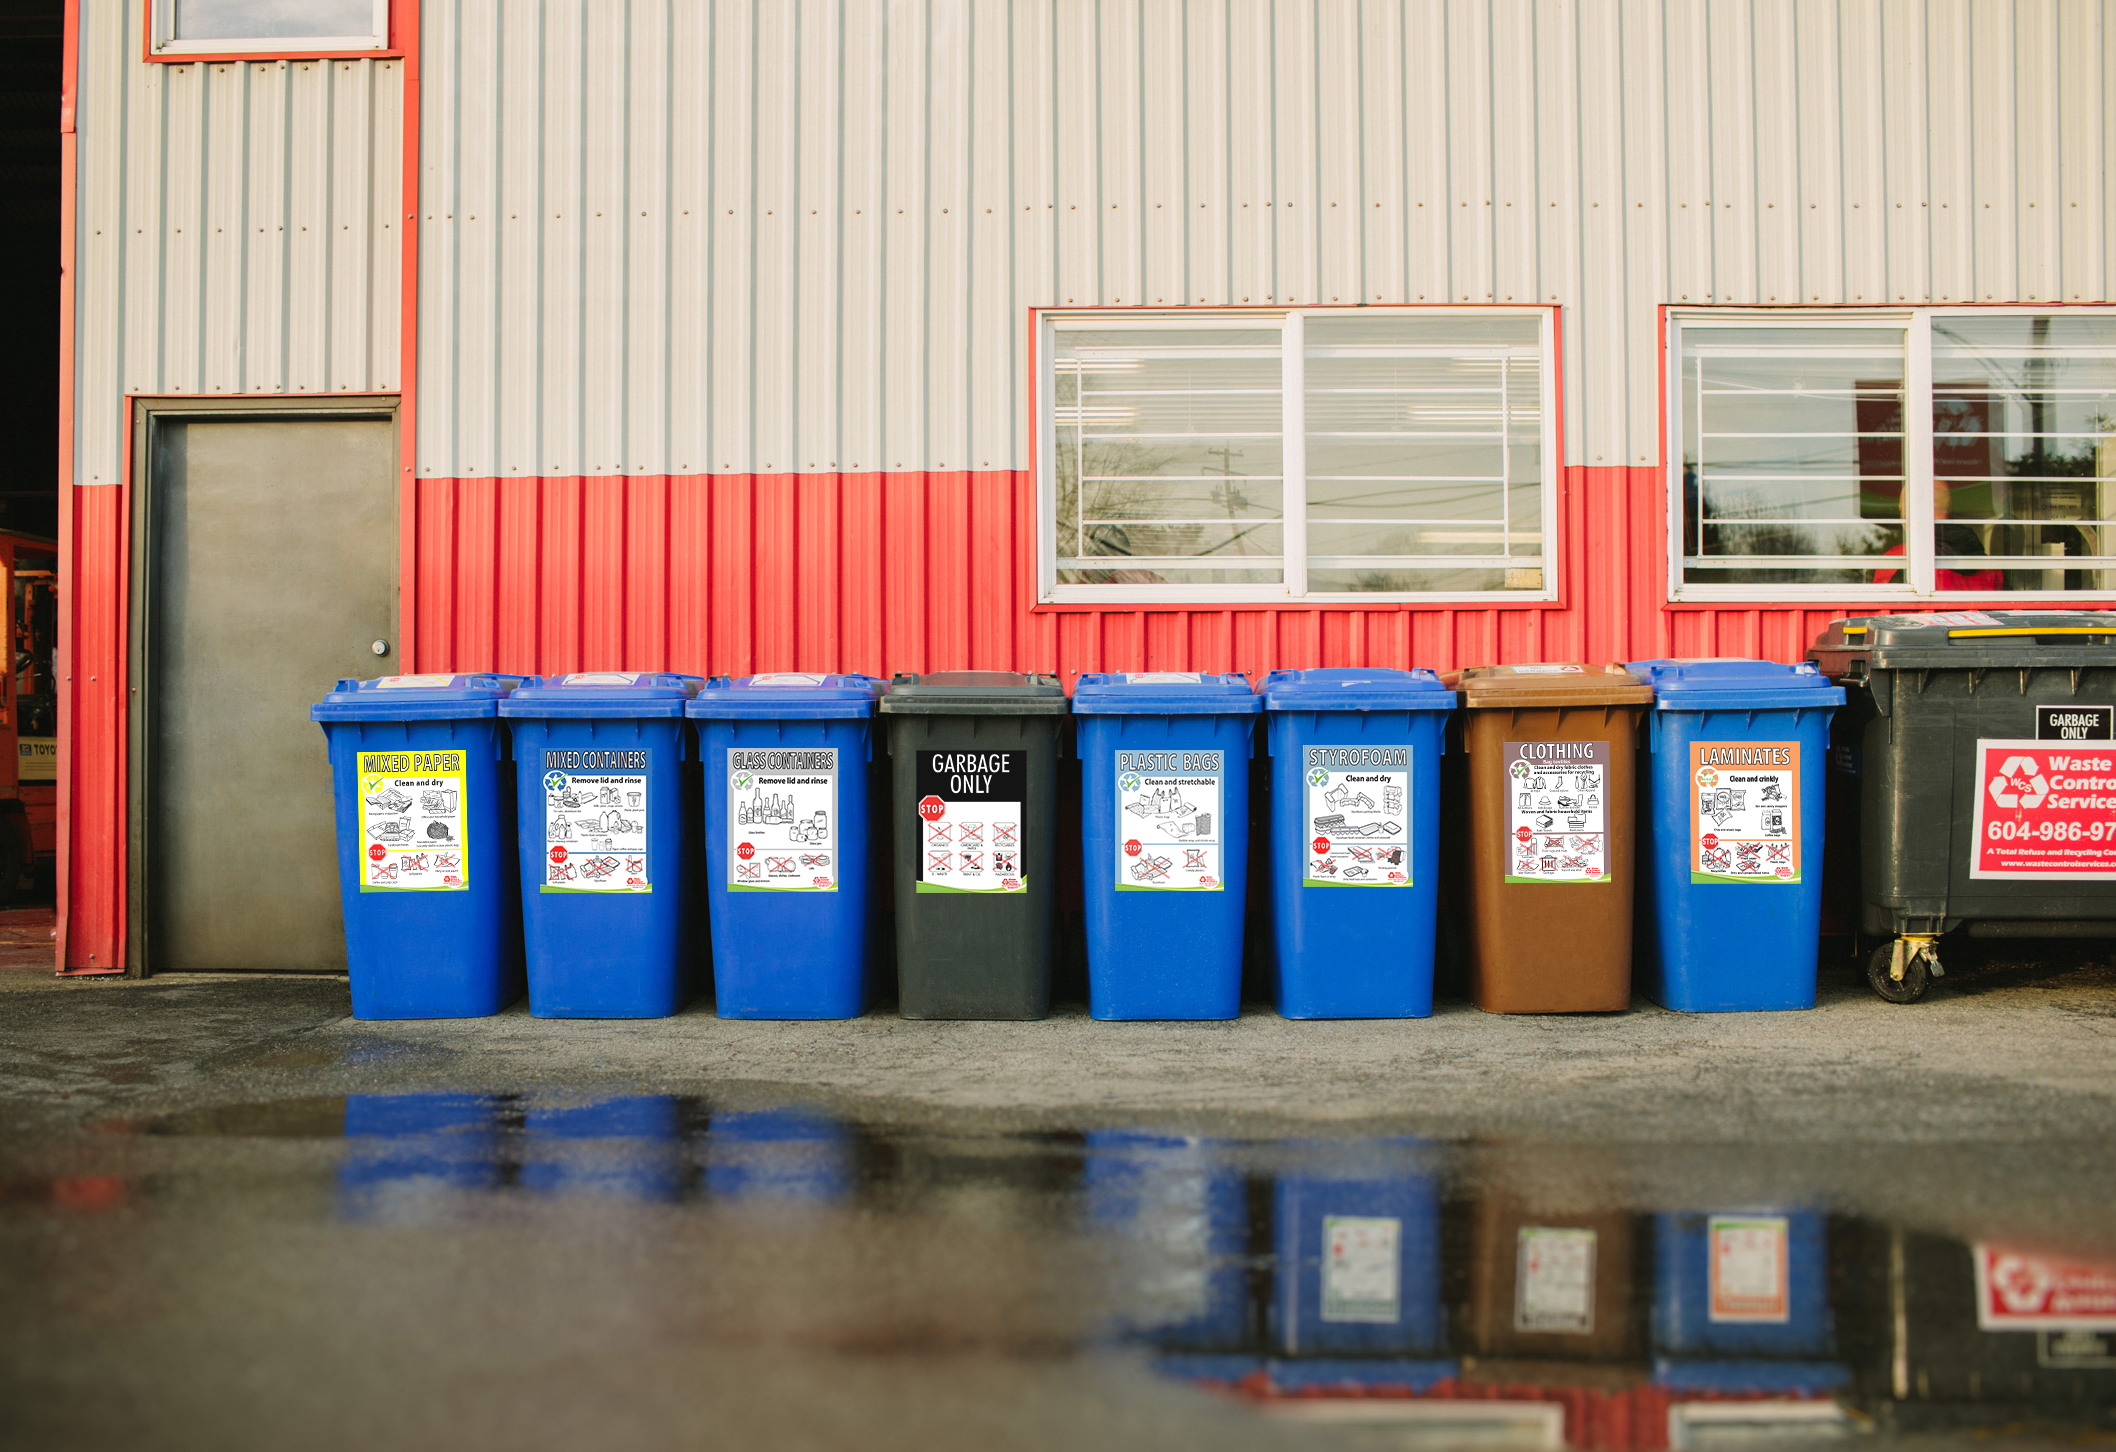 Residential Recycling Services - Waste Control Services